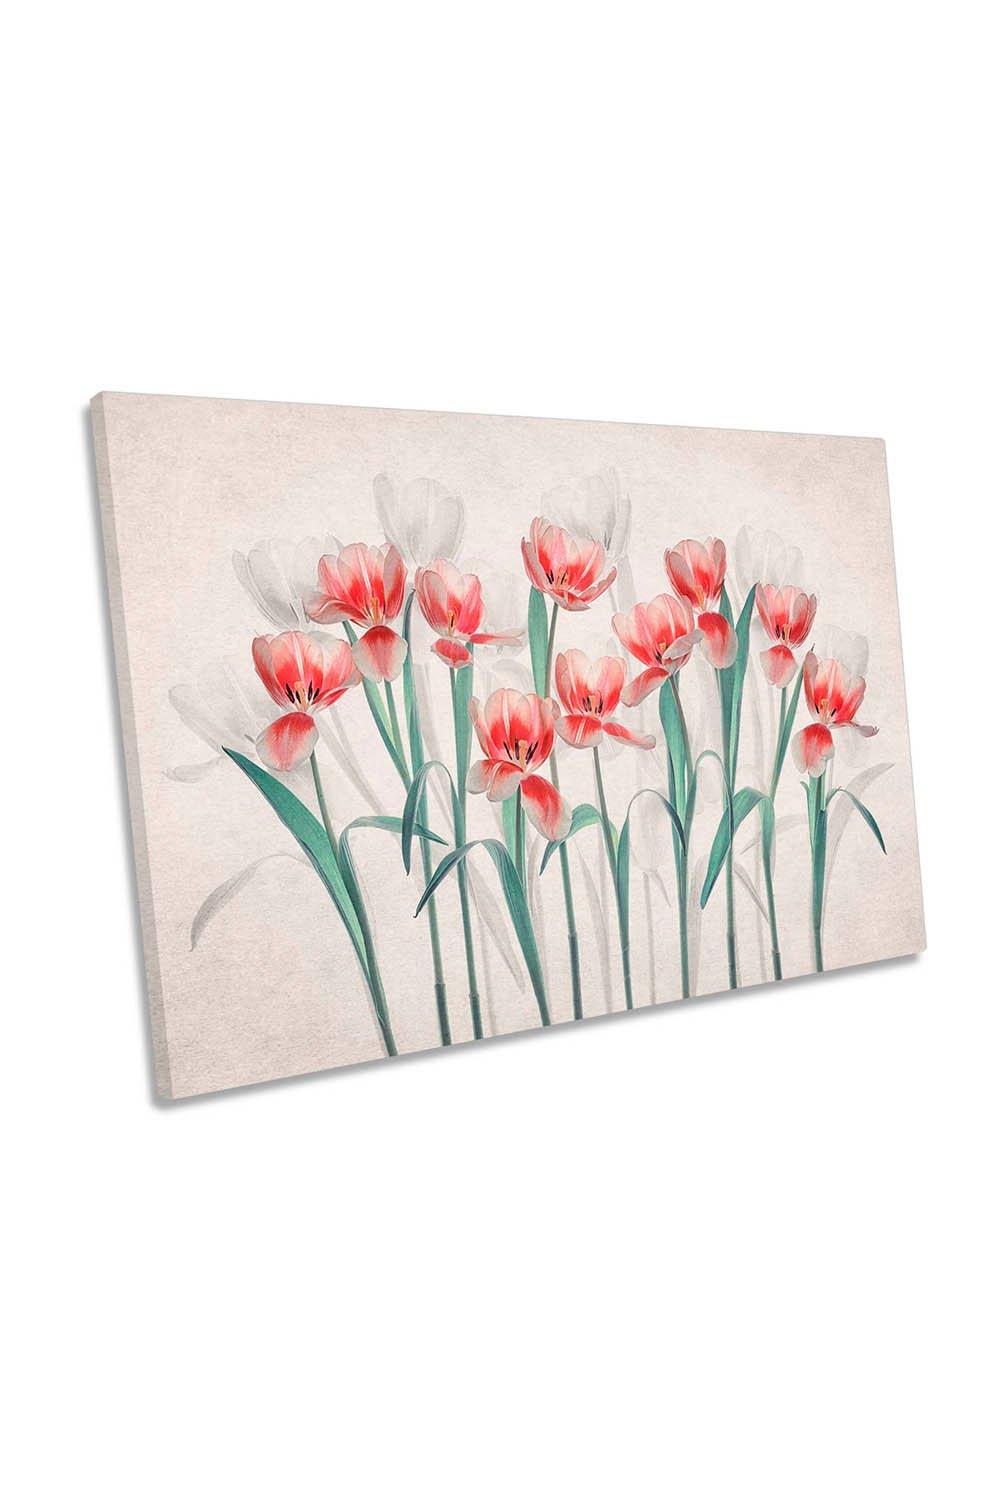 Joy of Spring Red Tulip Flowers Canvas Wall Art Picture Print